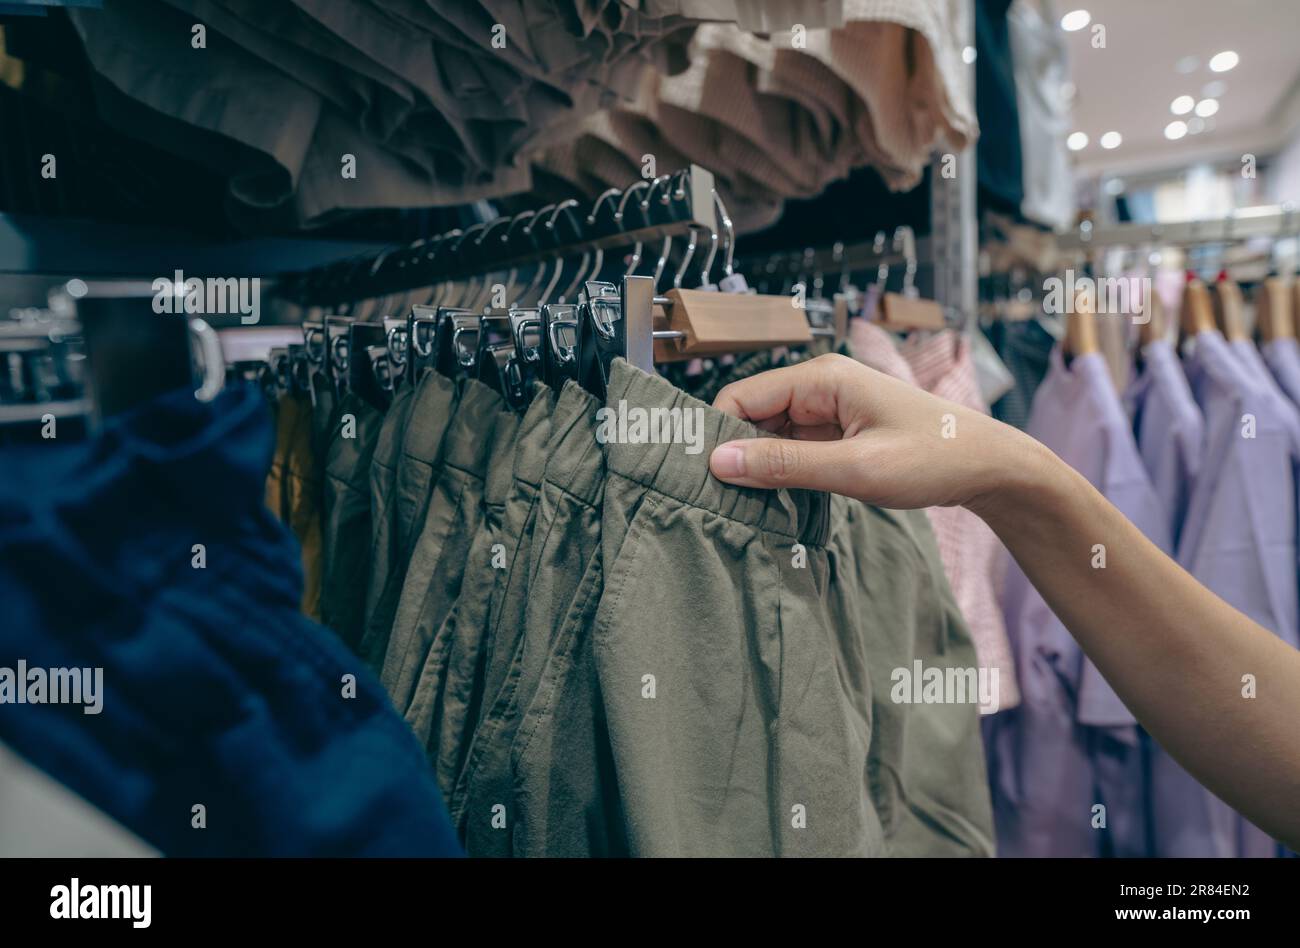 Woman shopping green shorts in clothing store. Woman choosing clothes. Shorts on hanger hanging on rack in clothing store. Fashion retail shop inside Stock Photo